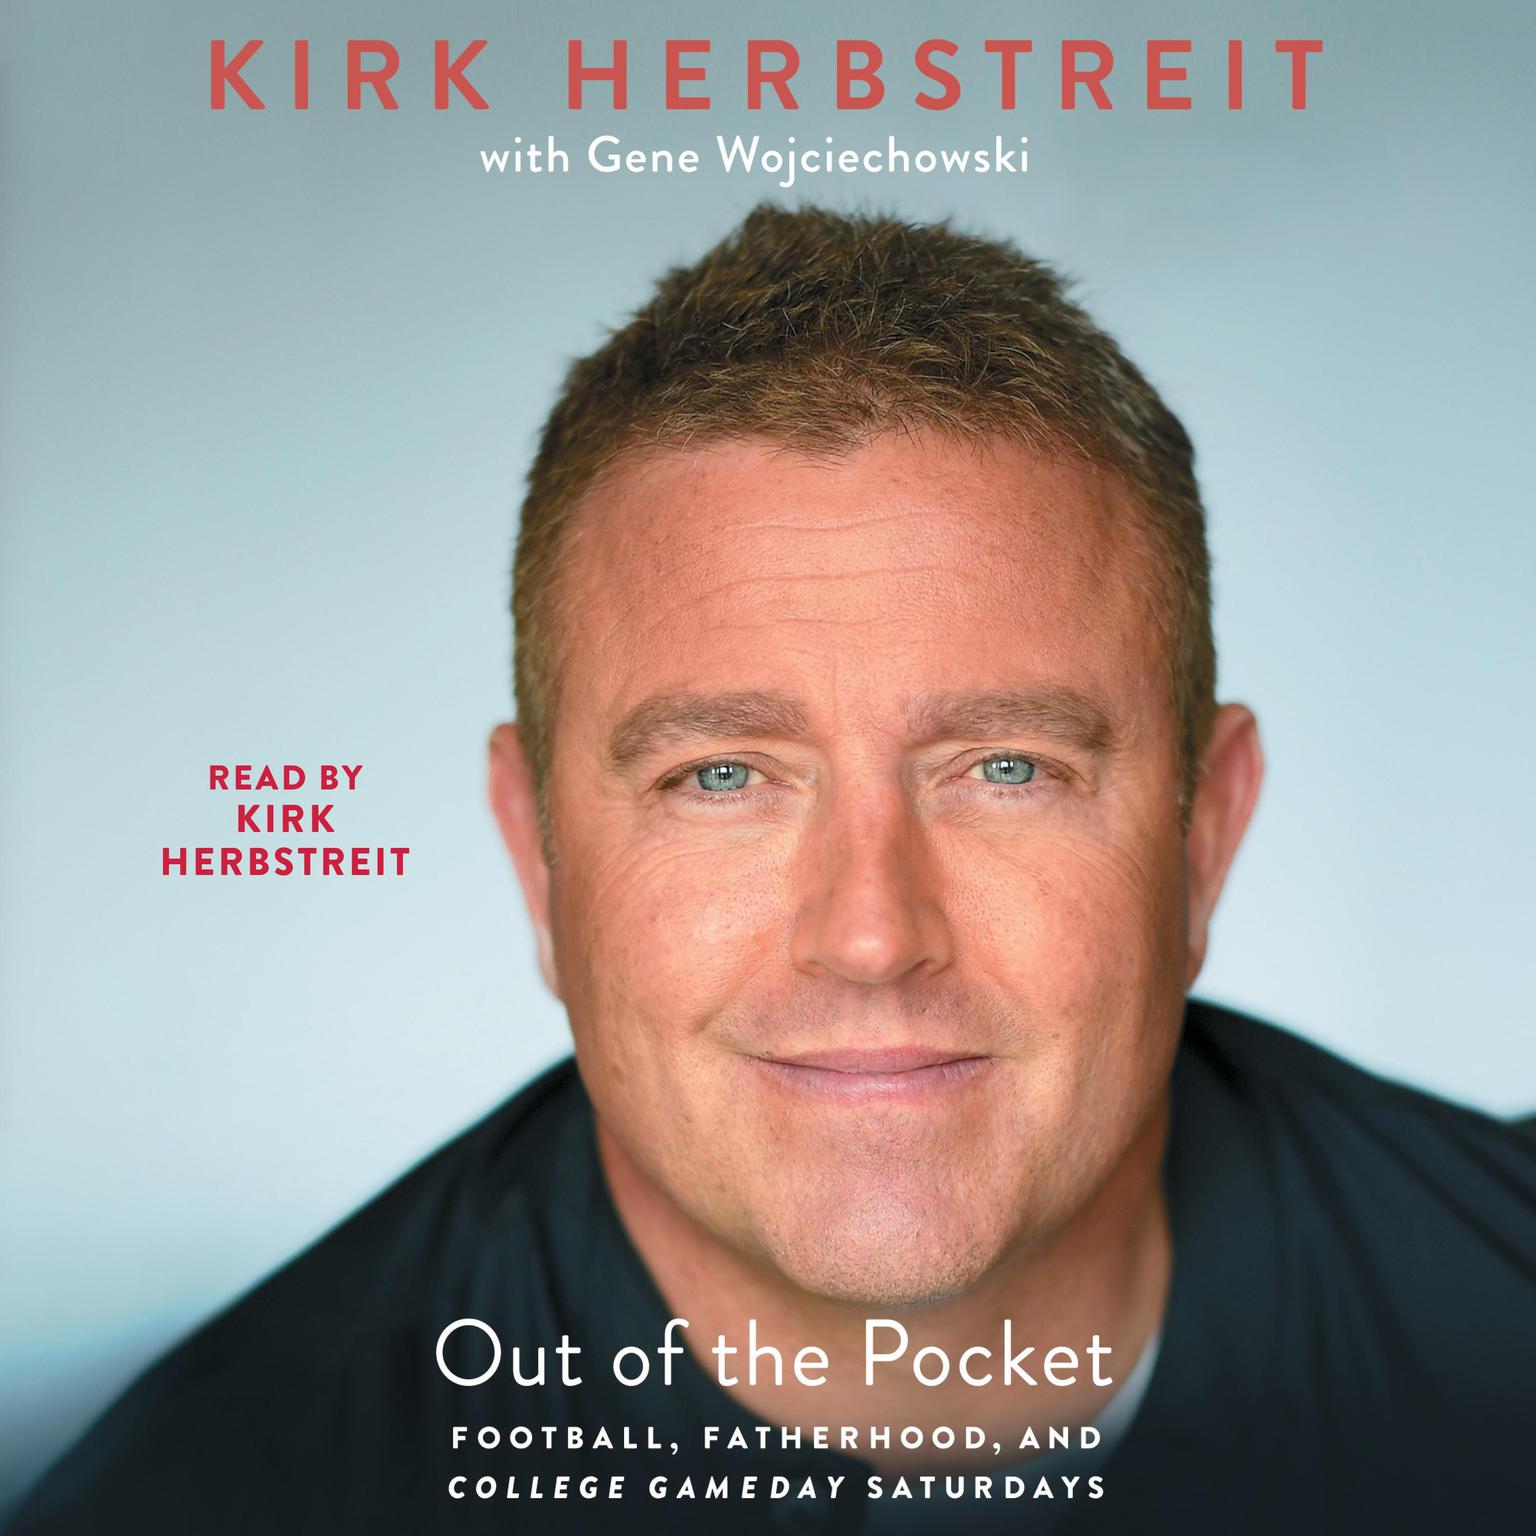 Out of the Pocket: Football, Fatherhood, and College GameDay Saturdays Audiobook, by Kirk Herbstreit